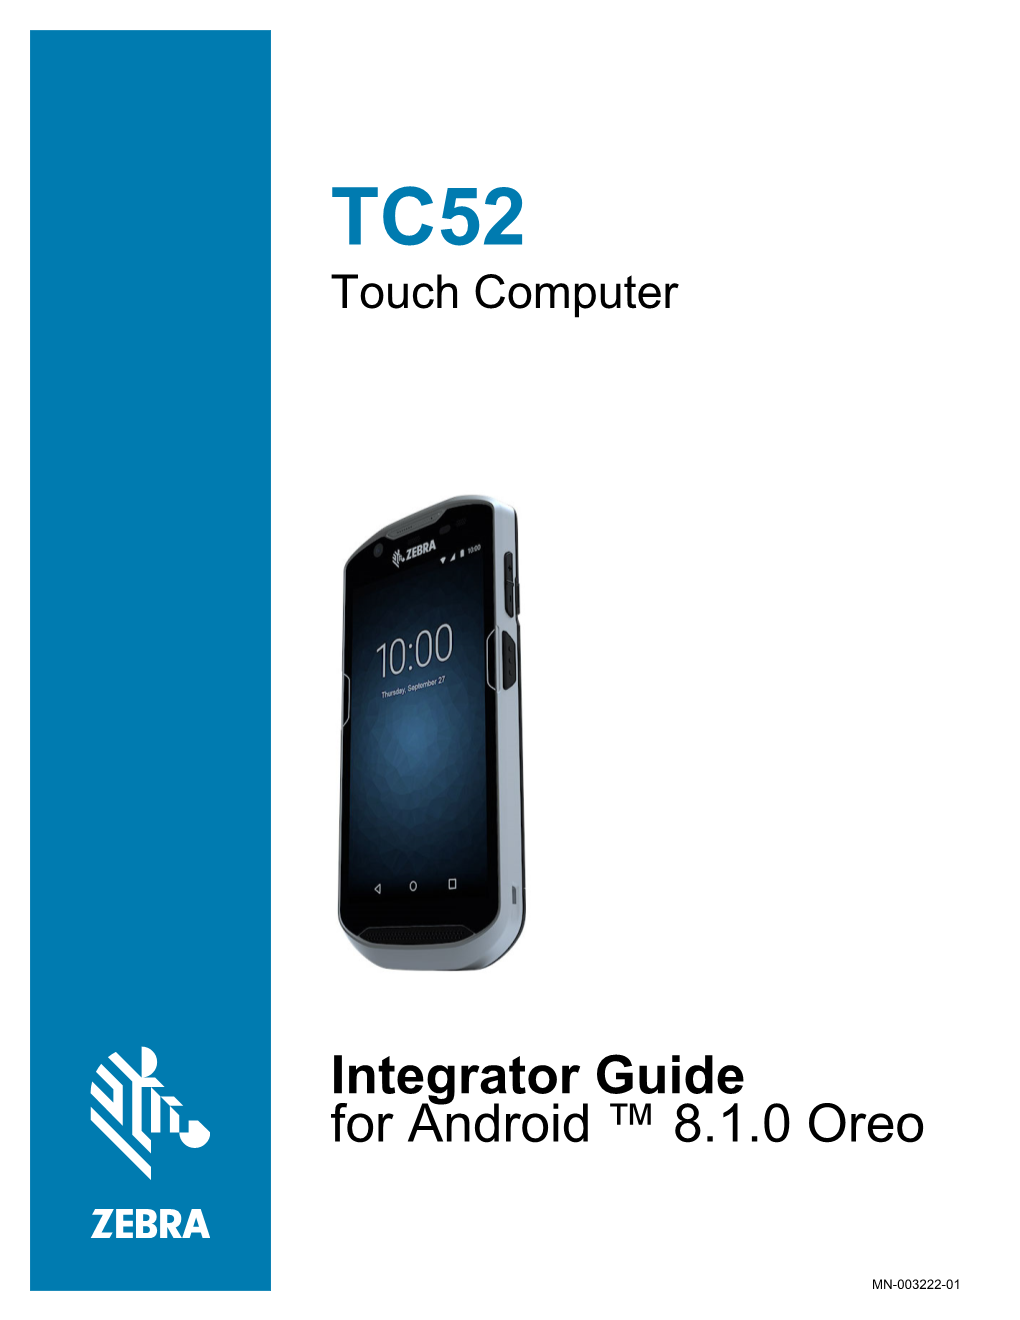 TC52 Touch Computer Integrator Guide for Android™ 8.1.0 Oreo (En)